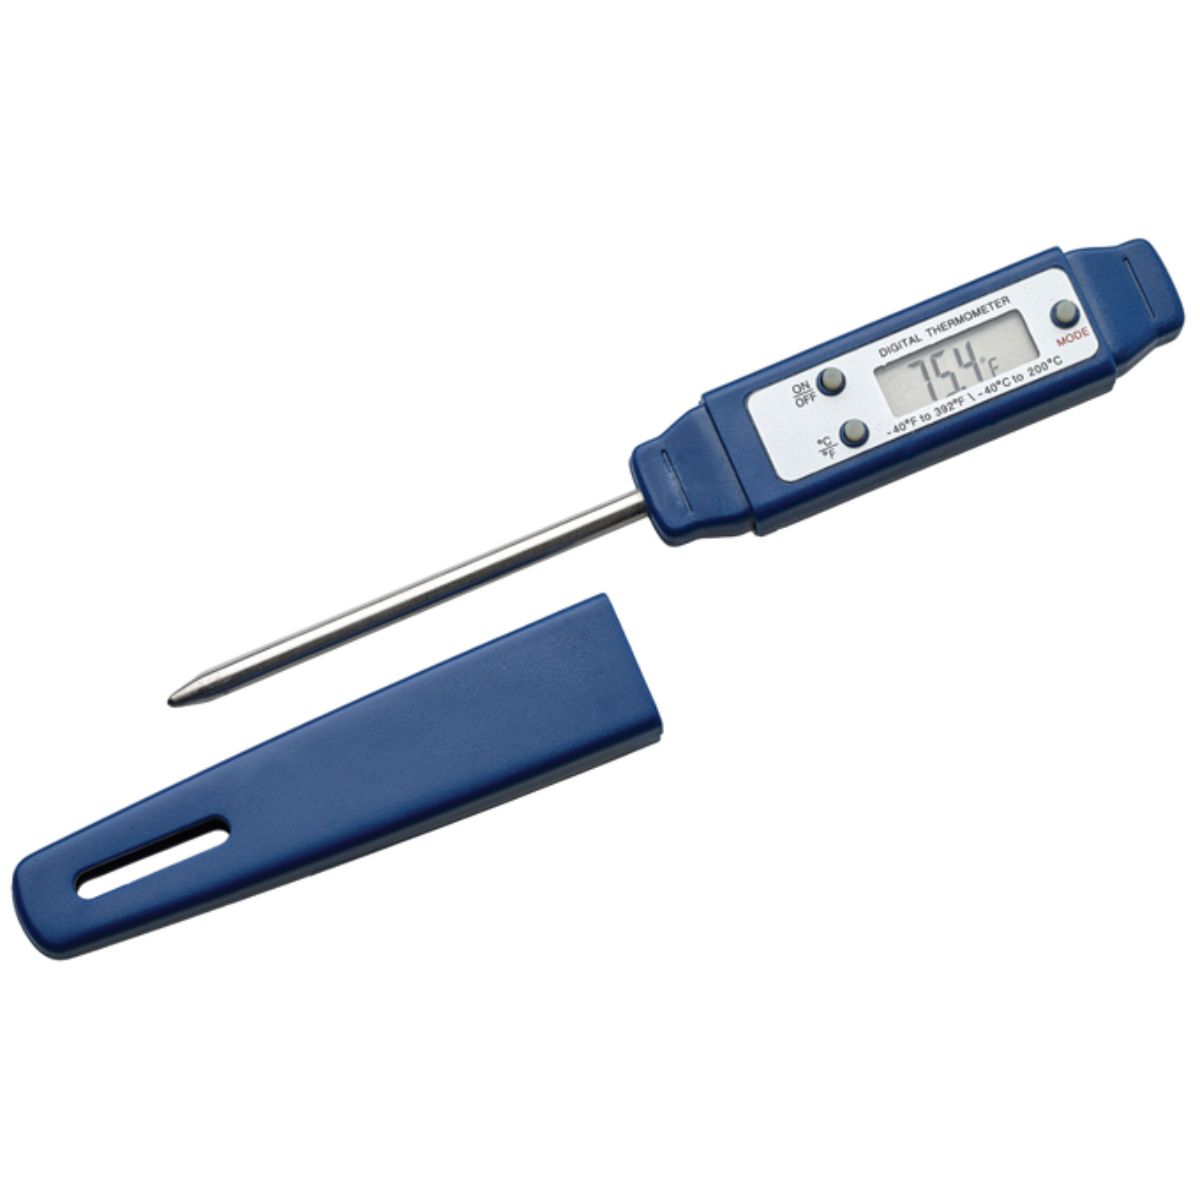 Starfrit Candy and Deep Fry Thermometer 104 F 40 C to 500 F 260 C